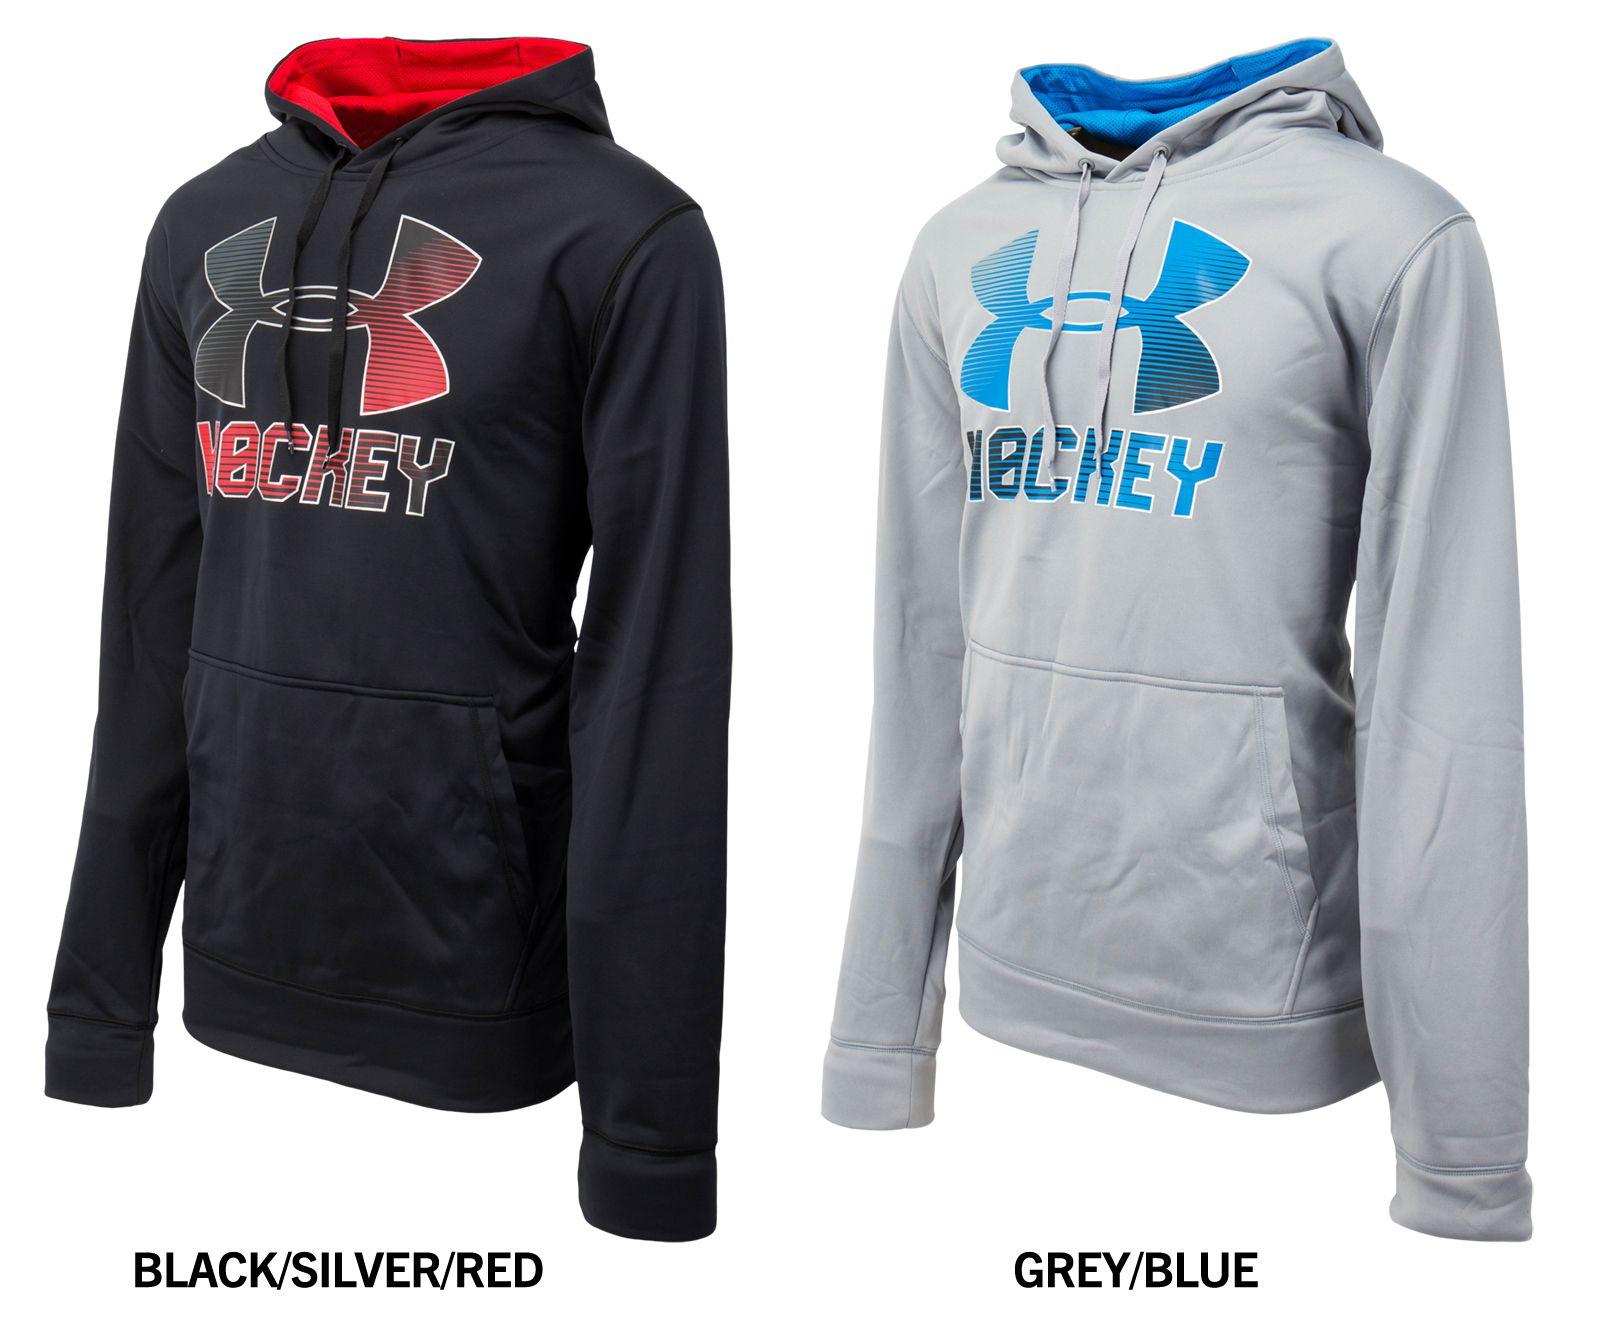 Red and Blue Under Armour Logo - Under Armour Storm Hockey Logo Men's Hoody